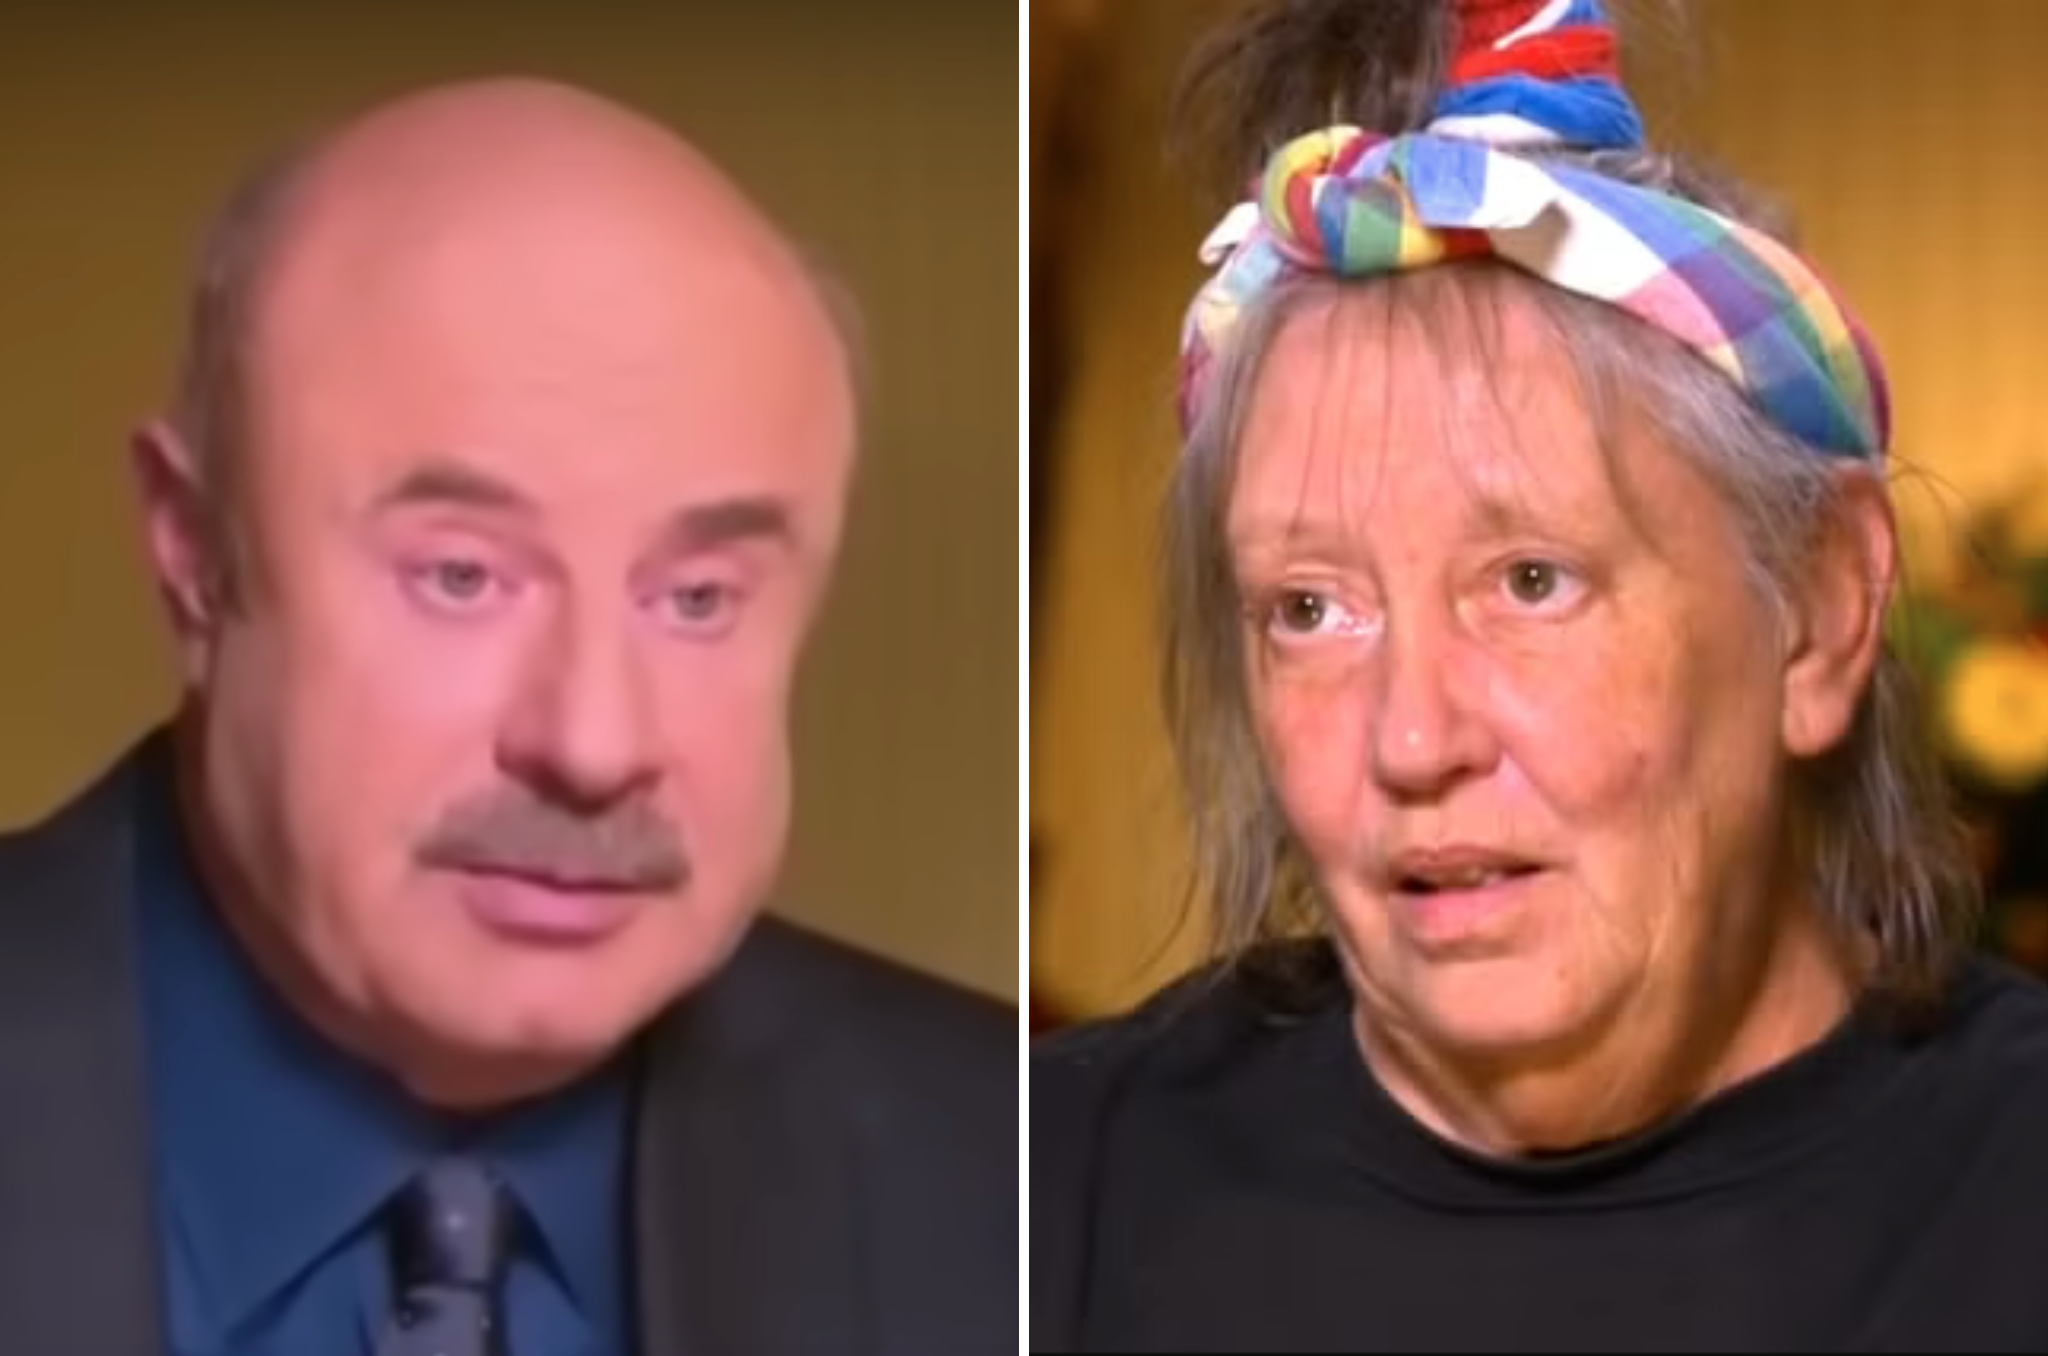 ‘I’m very sick. I need help,’ Shelley Duvall told Dr Phil during the infamous 2016 interview